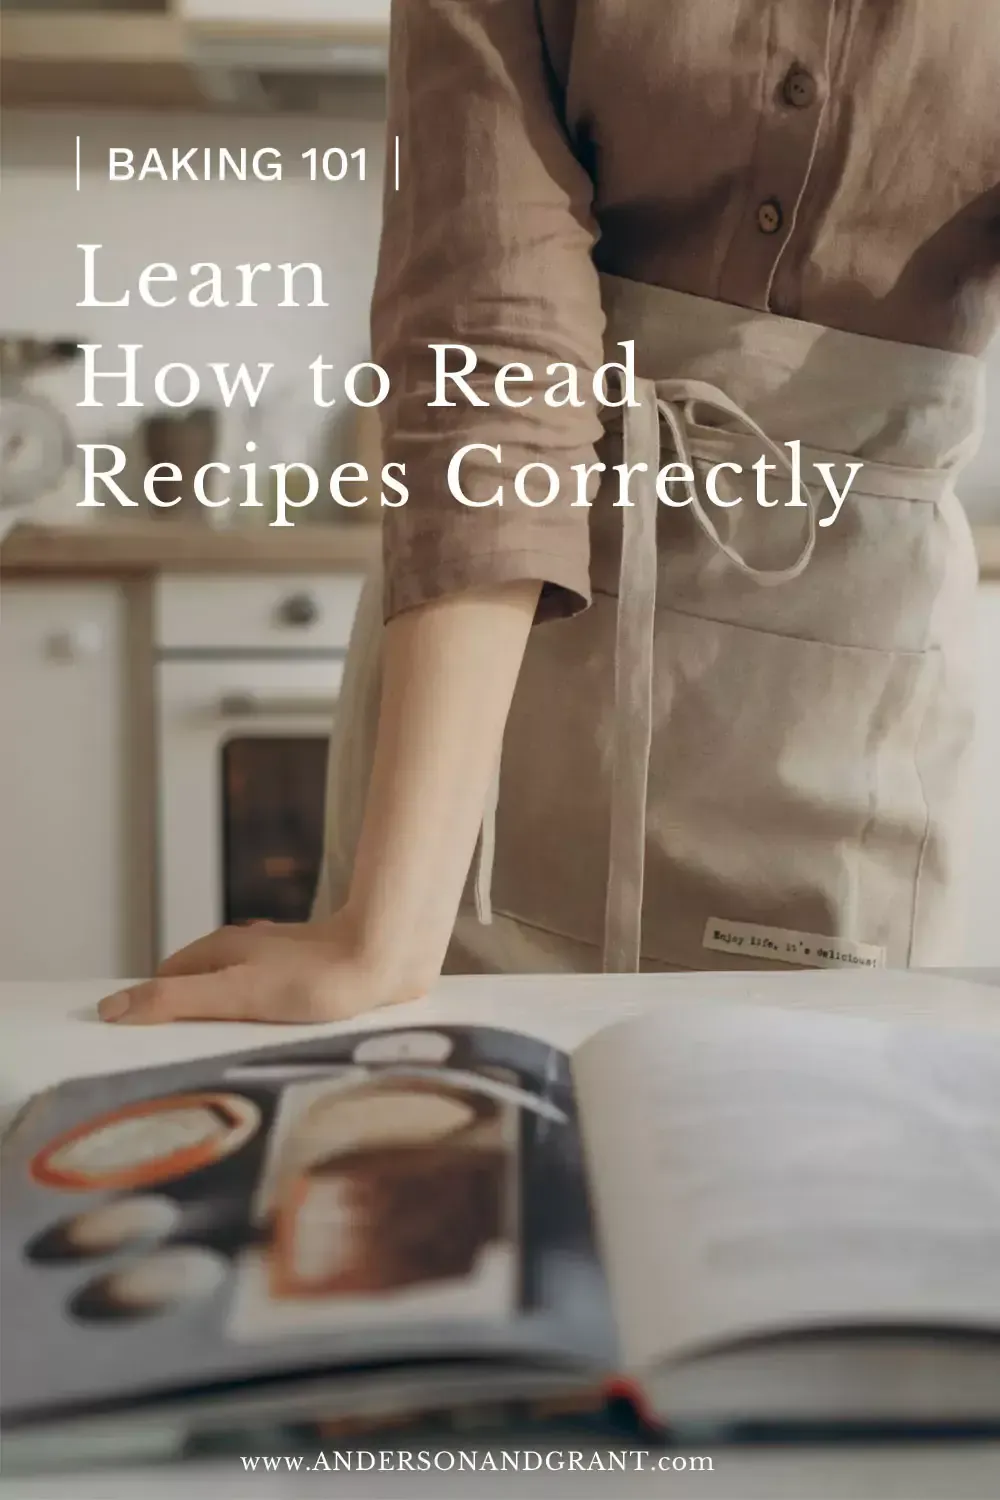 Learn How to Read Recipes the Correct Way